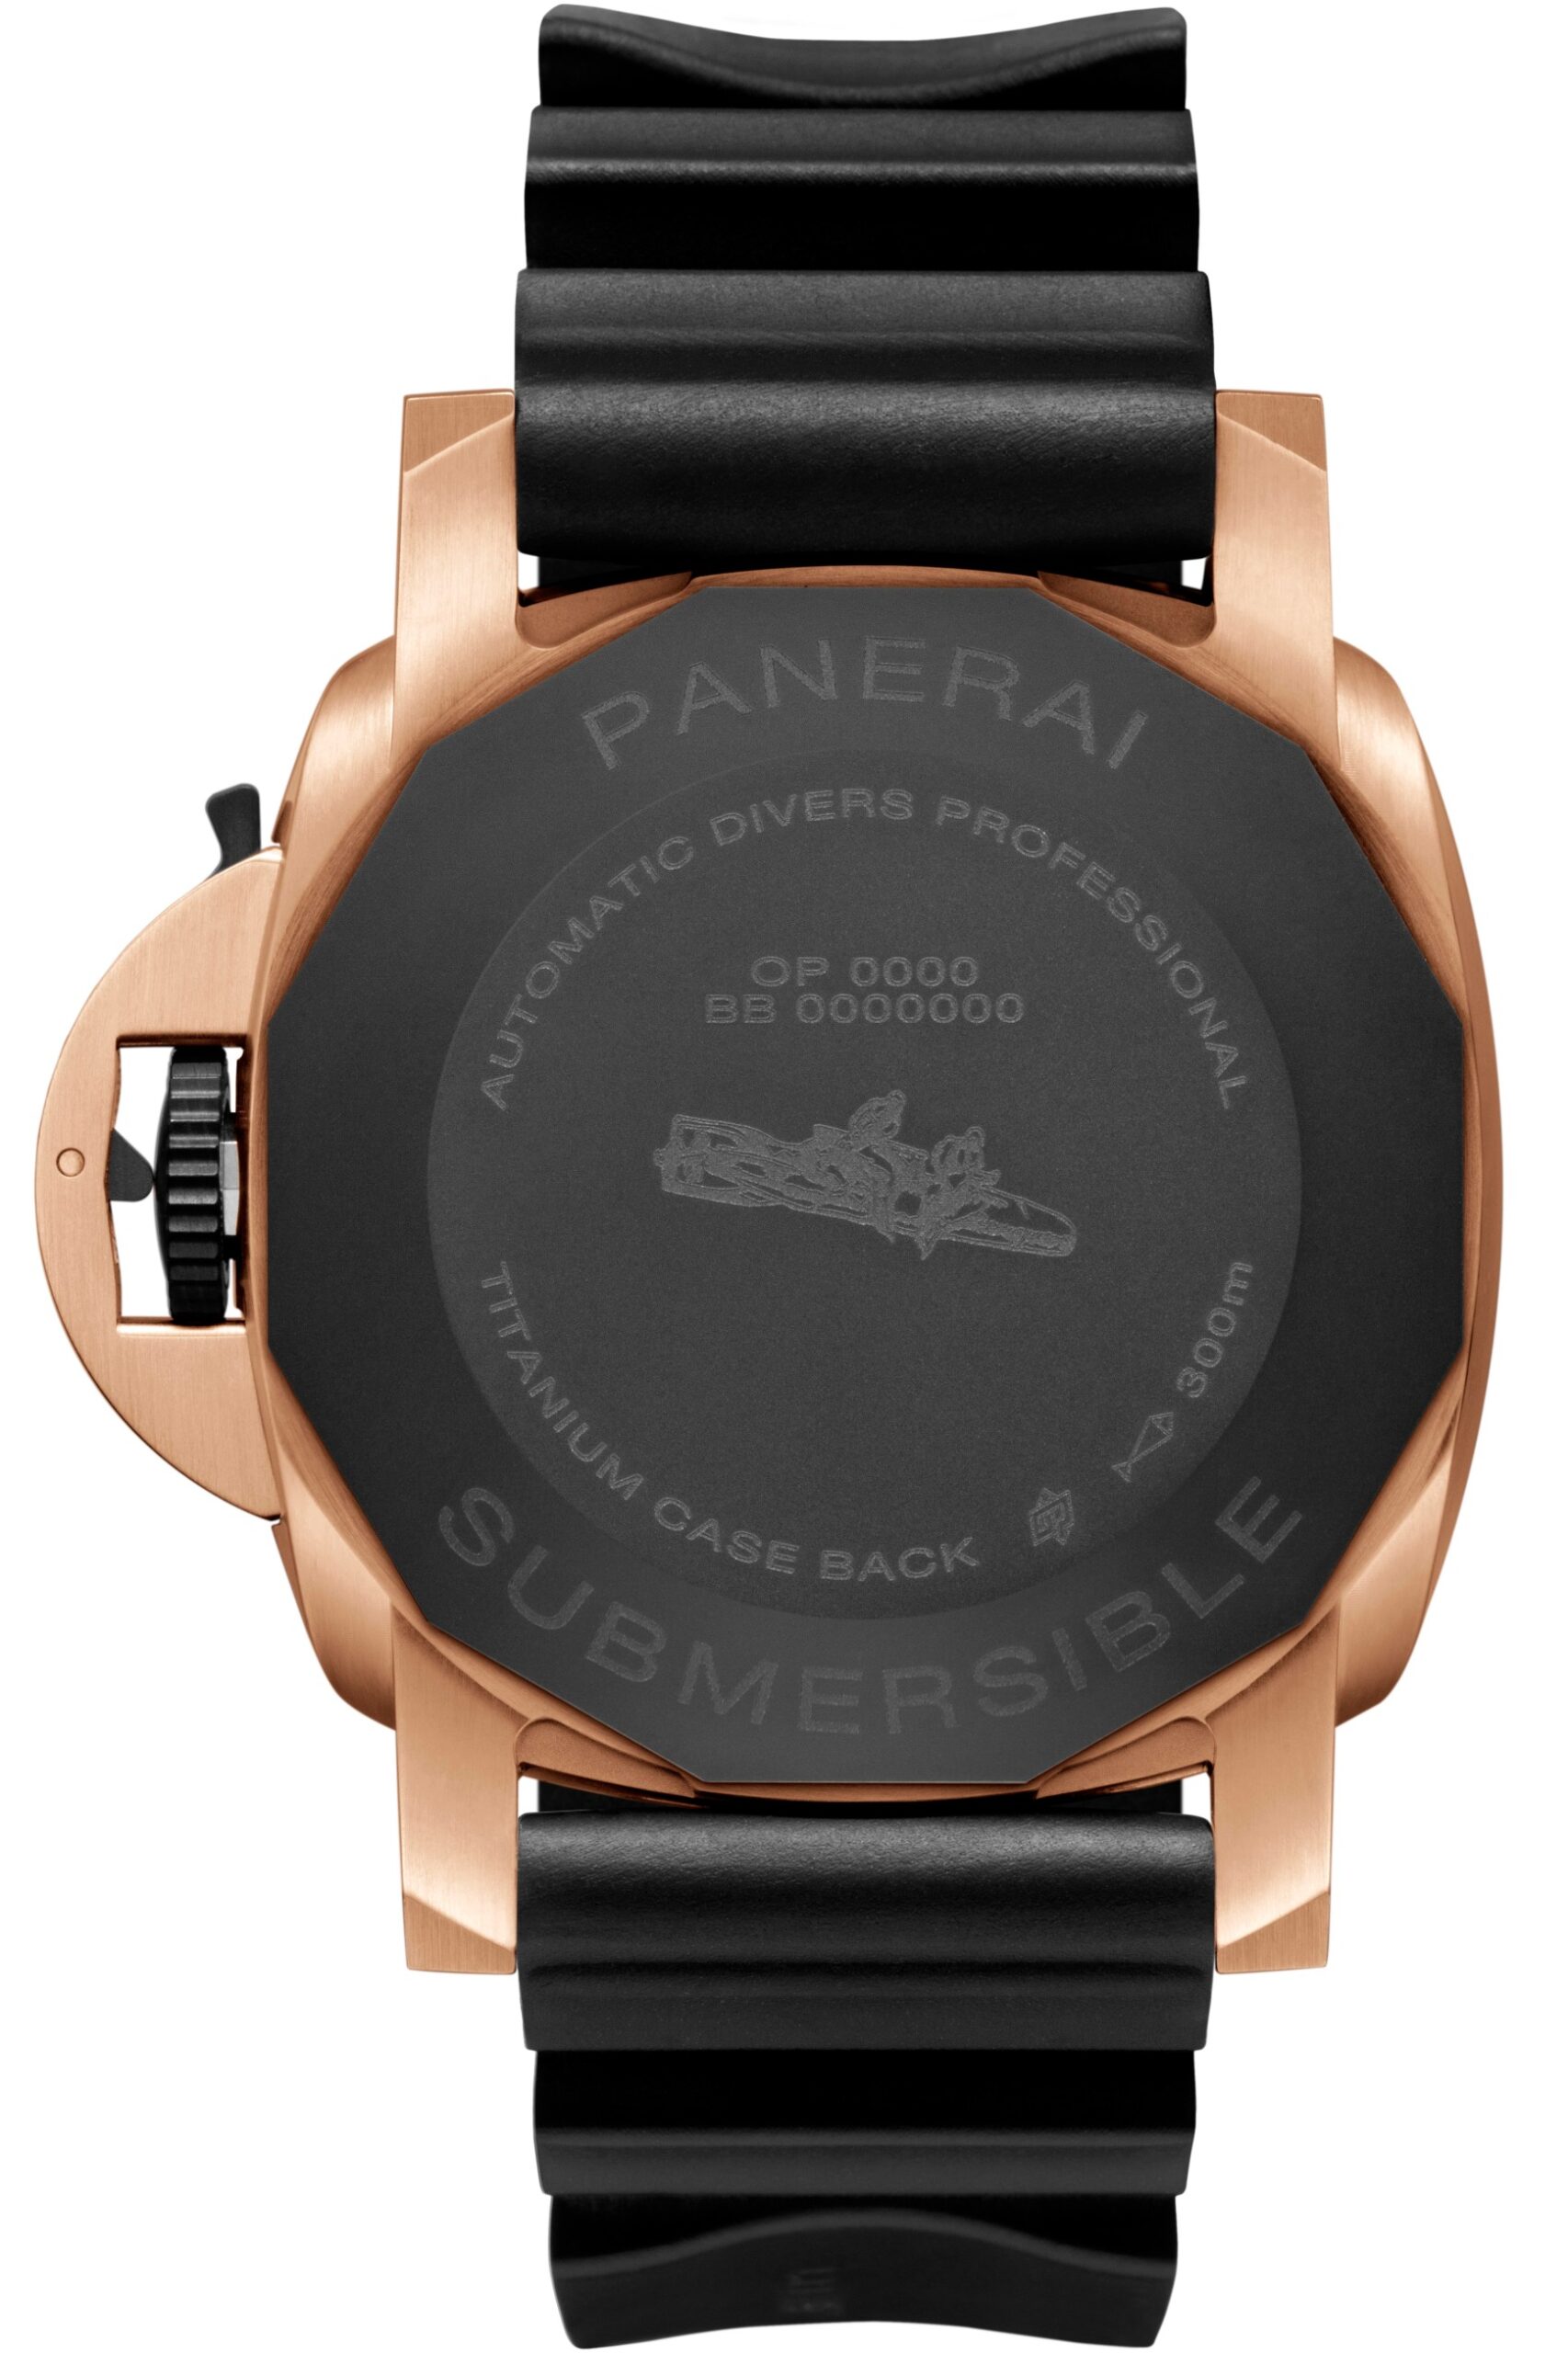 FEATURING: PANERAI - Submersible GoldtechTM Orocarbo – 44mm